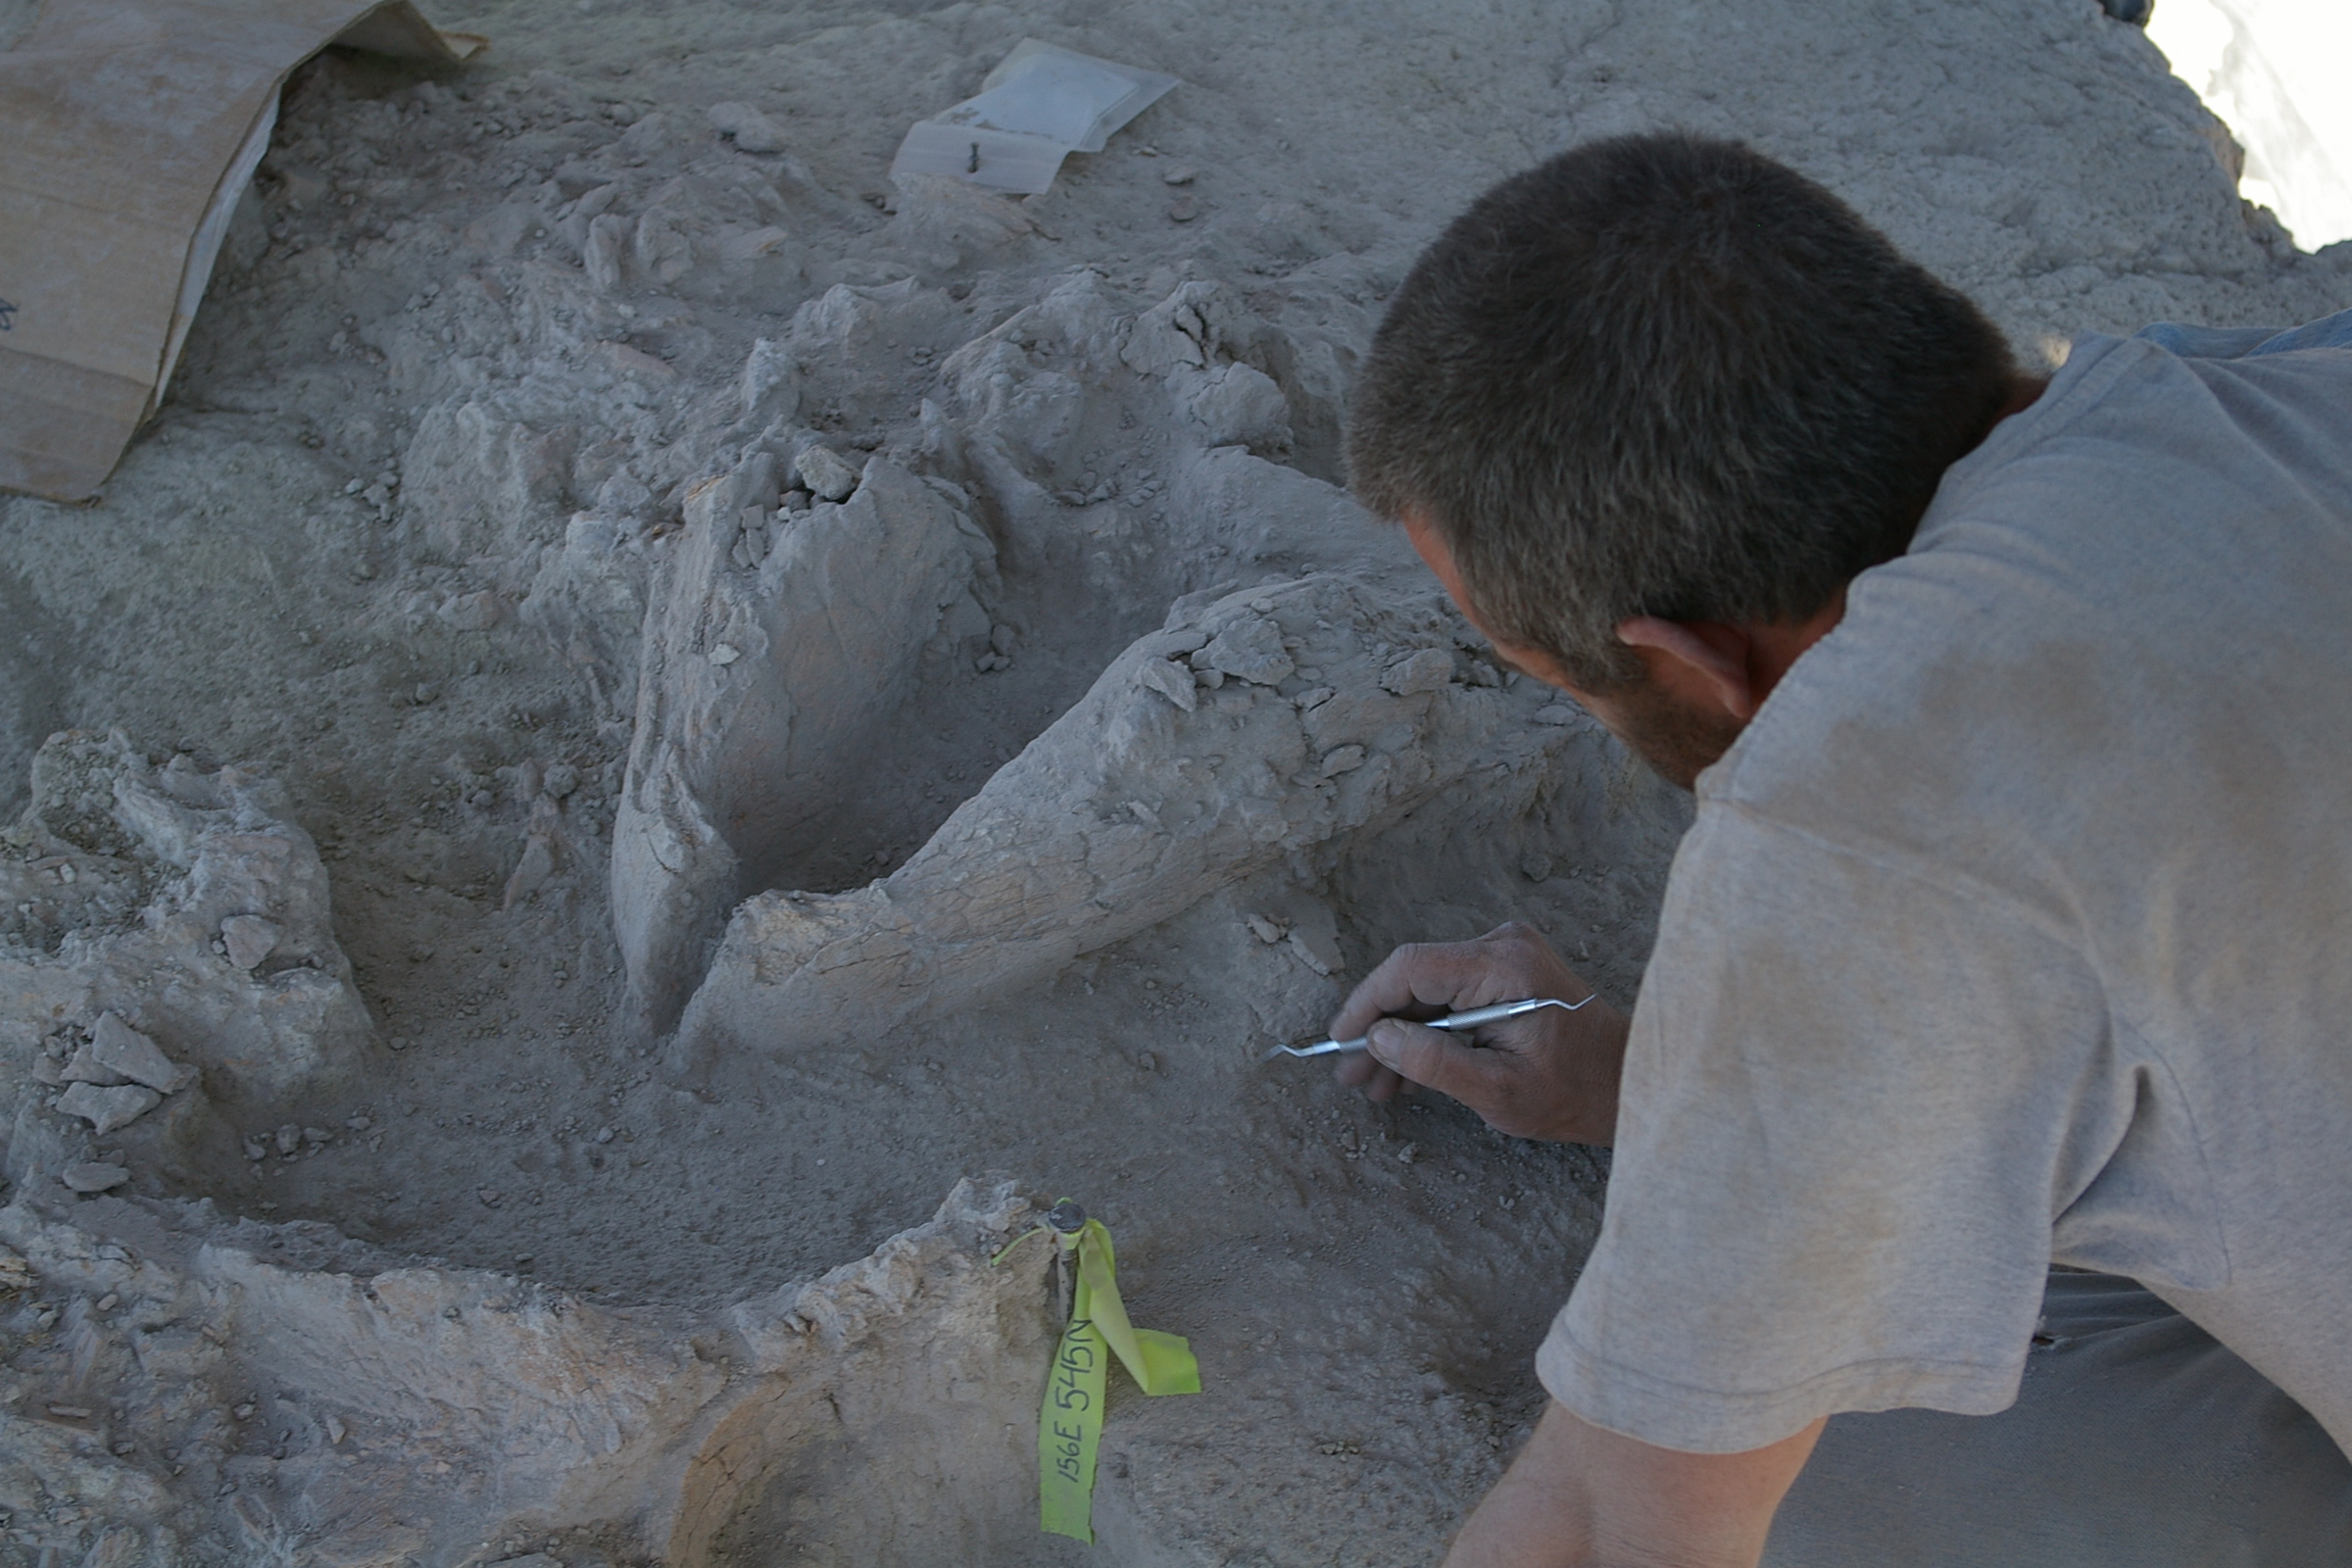 Figure 5. The mandible of Gomphothere #2 during excavation. The dentition, key to the identification of the species, was not exposed until some months after excavation in the lab.